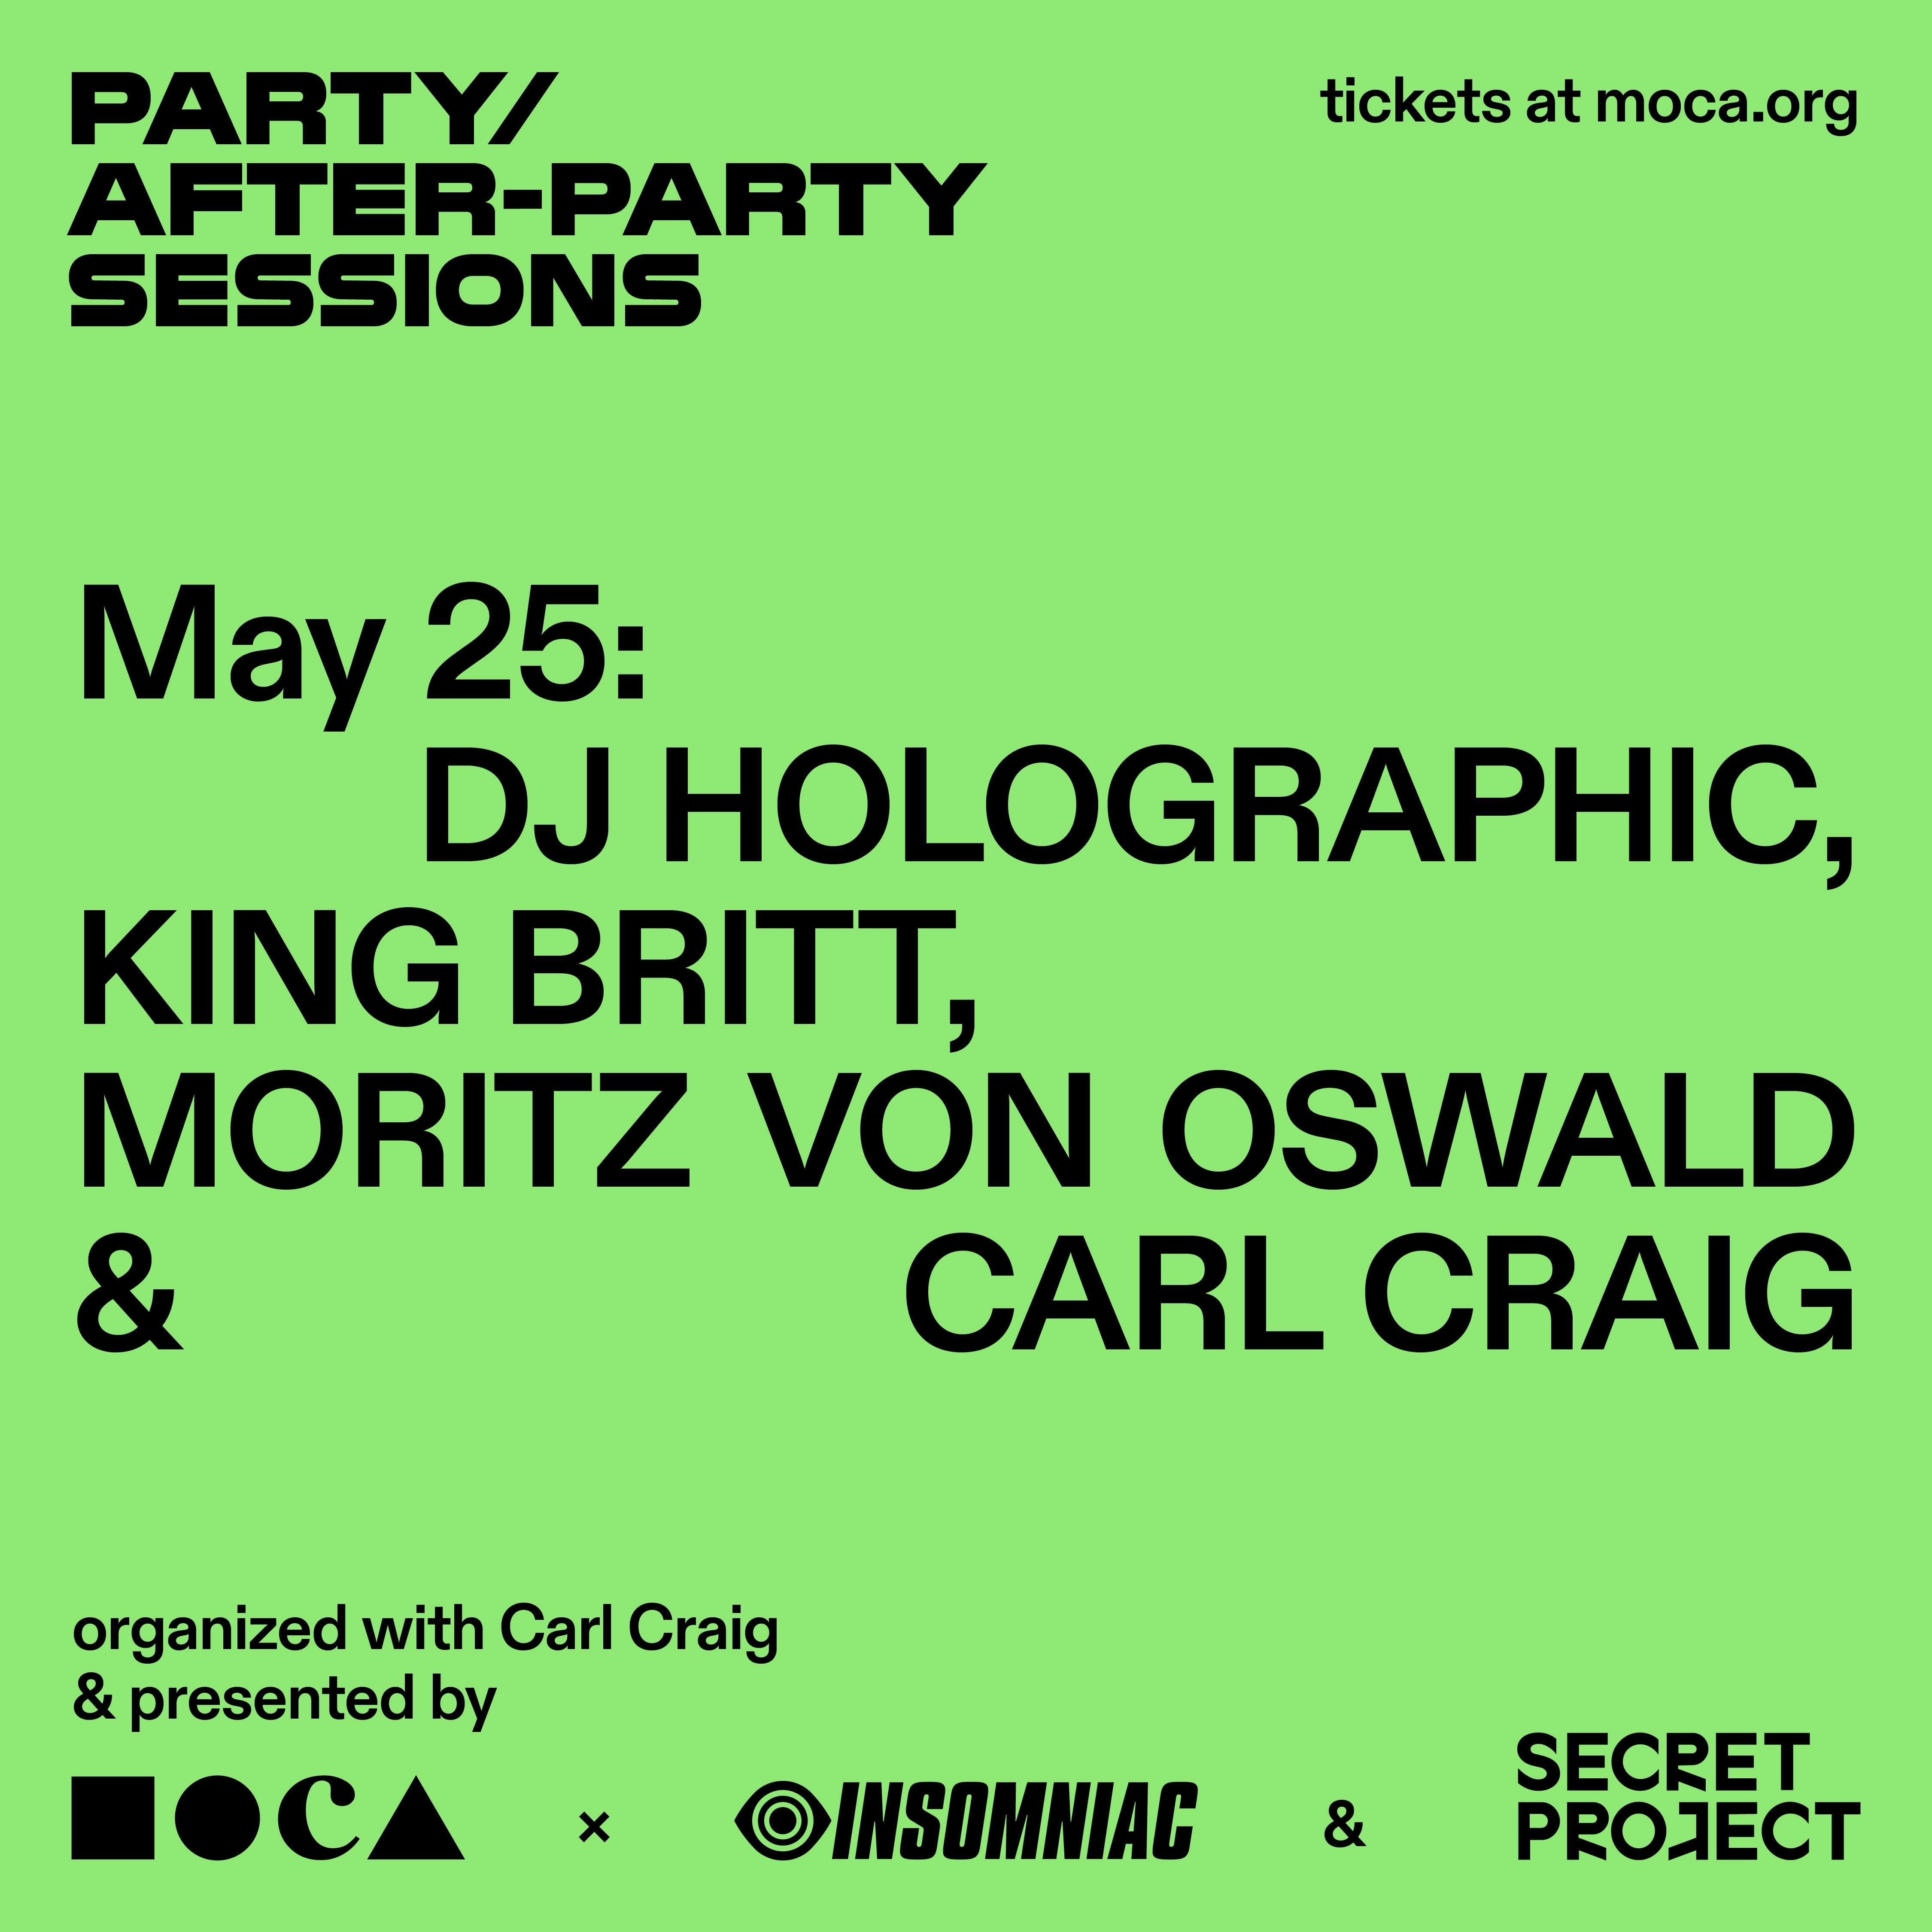 Party/After-Party Sessions Ft DJ Holographic, King Britt, Moritz von Oswald, and Carl Craig - フライヤー表